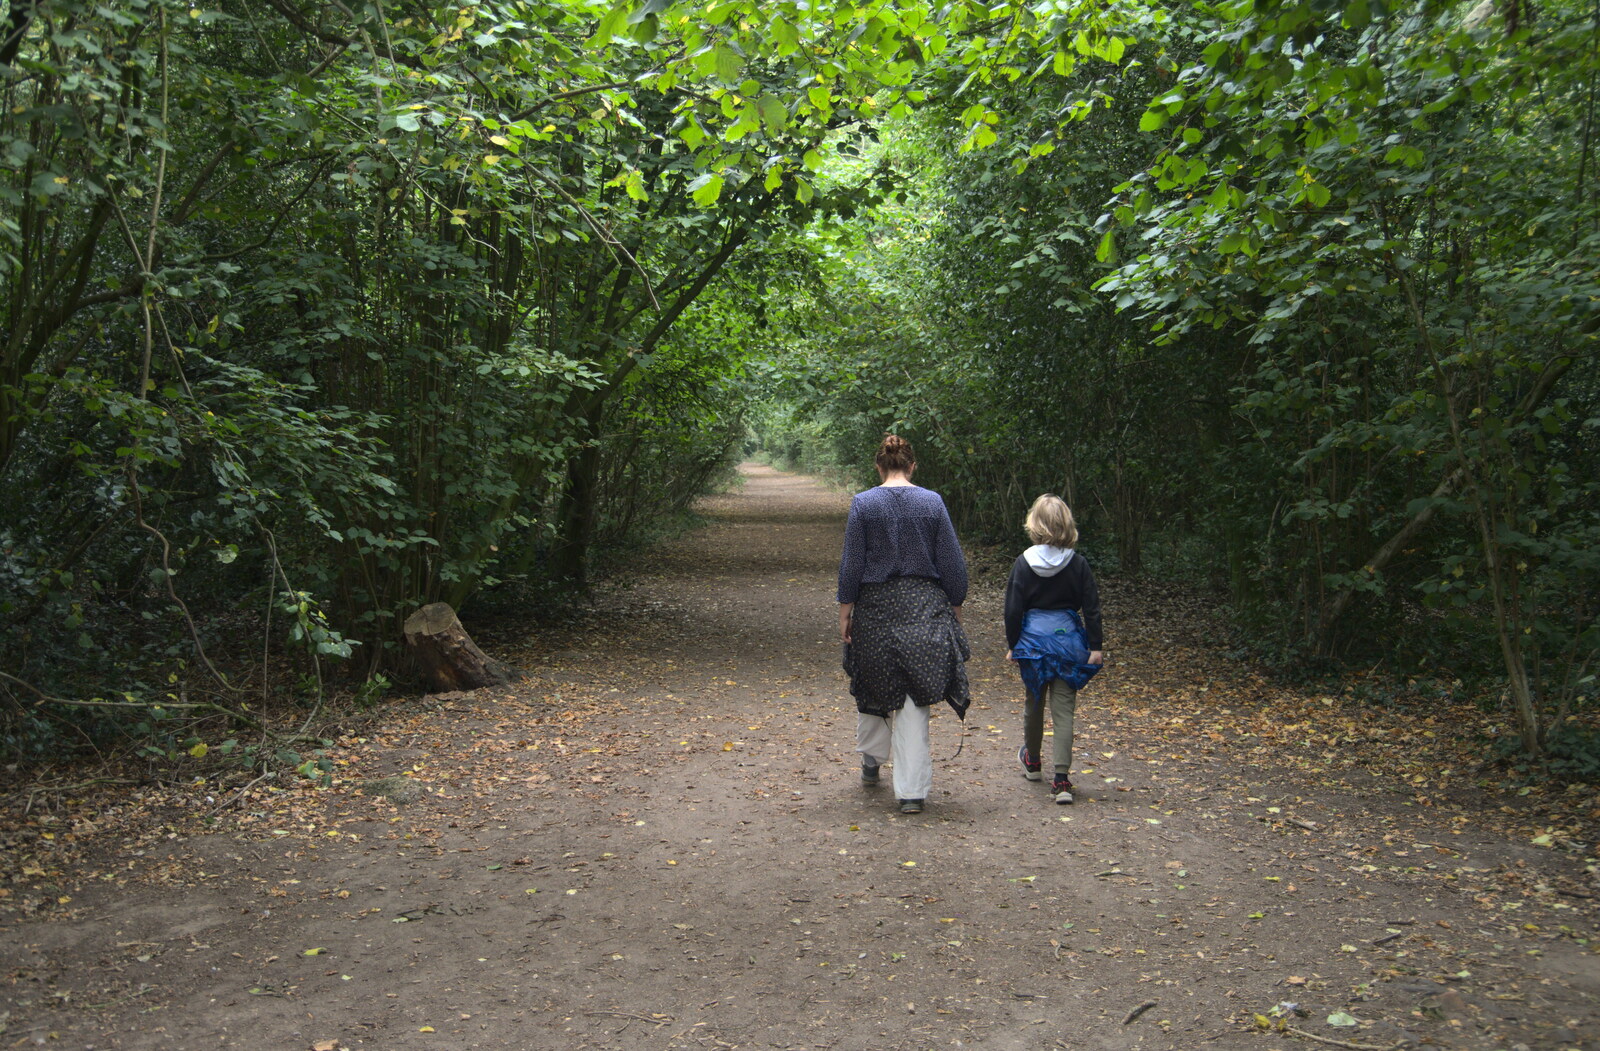 Isobel and Harry head off from Jules Visits, and a Trip to Tyrrel's Wood, Pulham Market, Norfolk - 16th August 2020